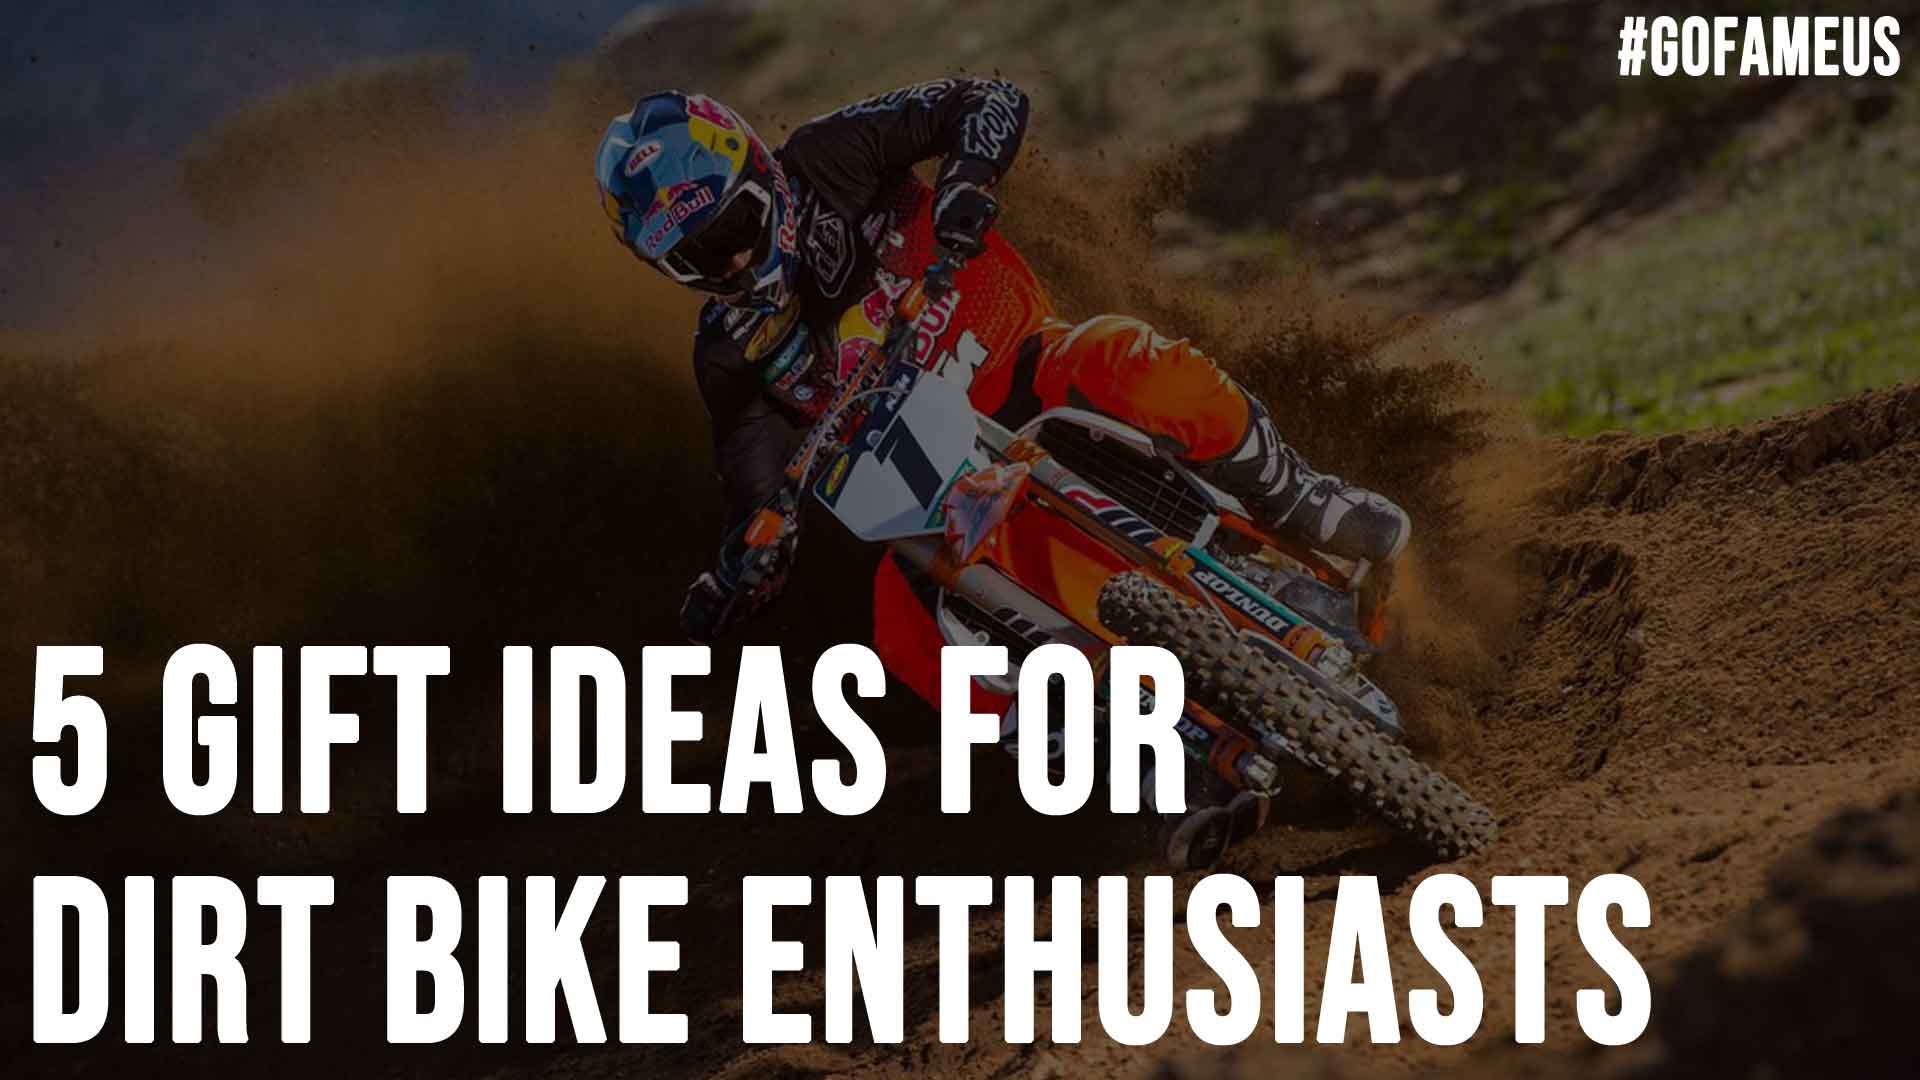 5 Gift Ideas for Dirt Bike Enthusiasts